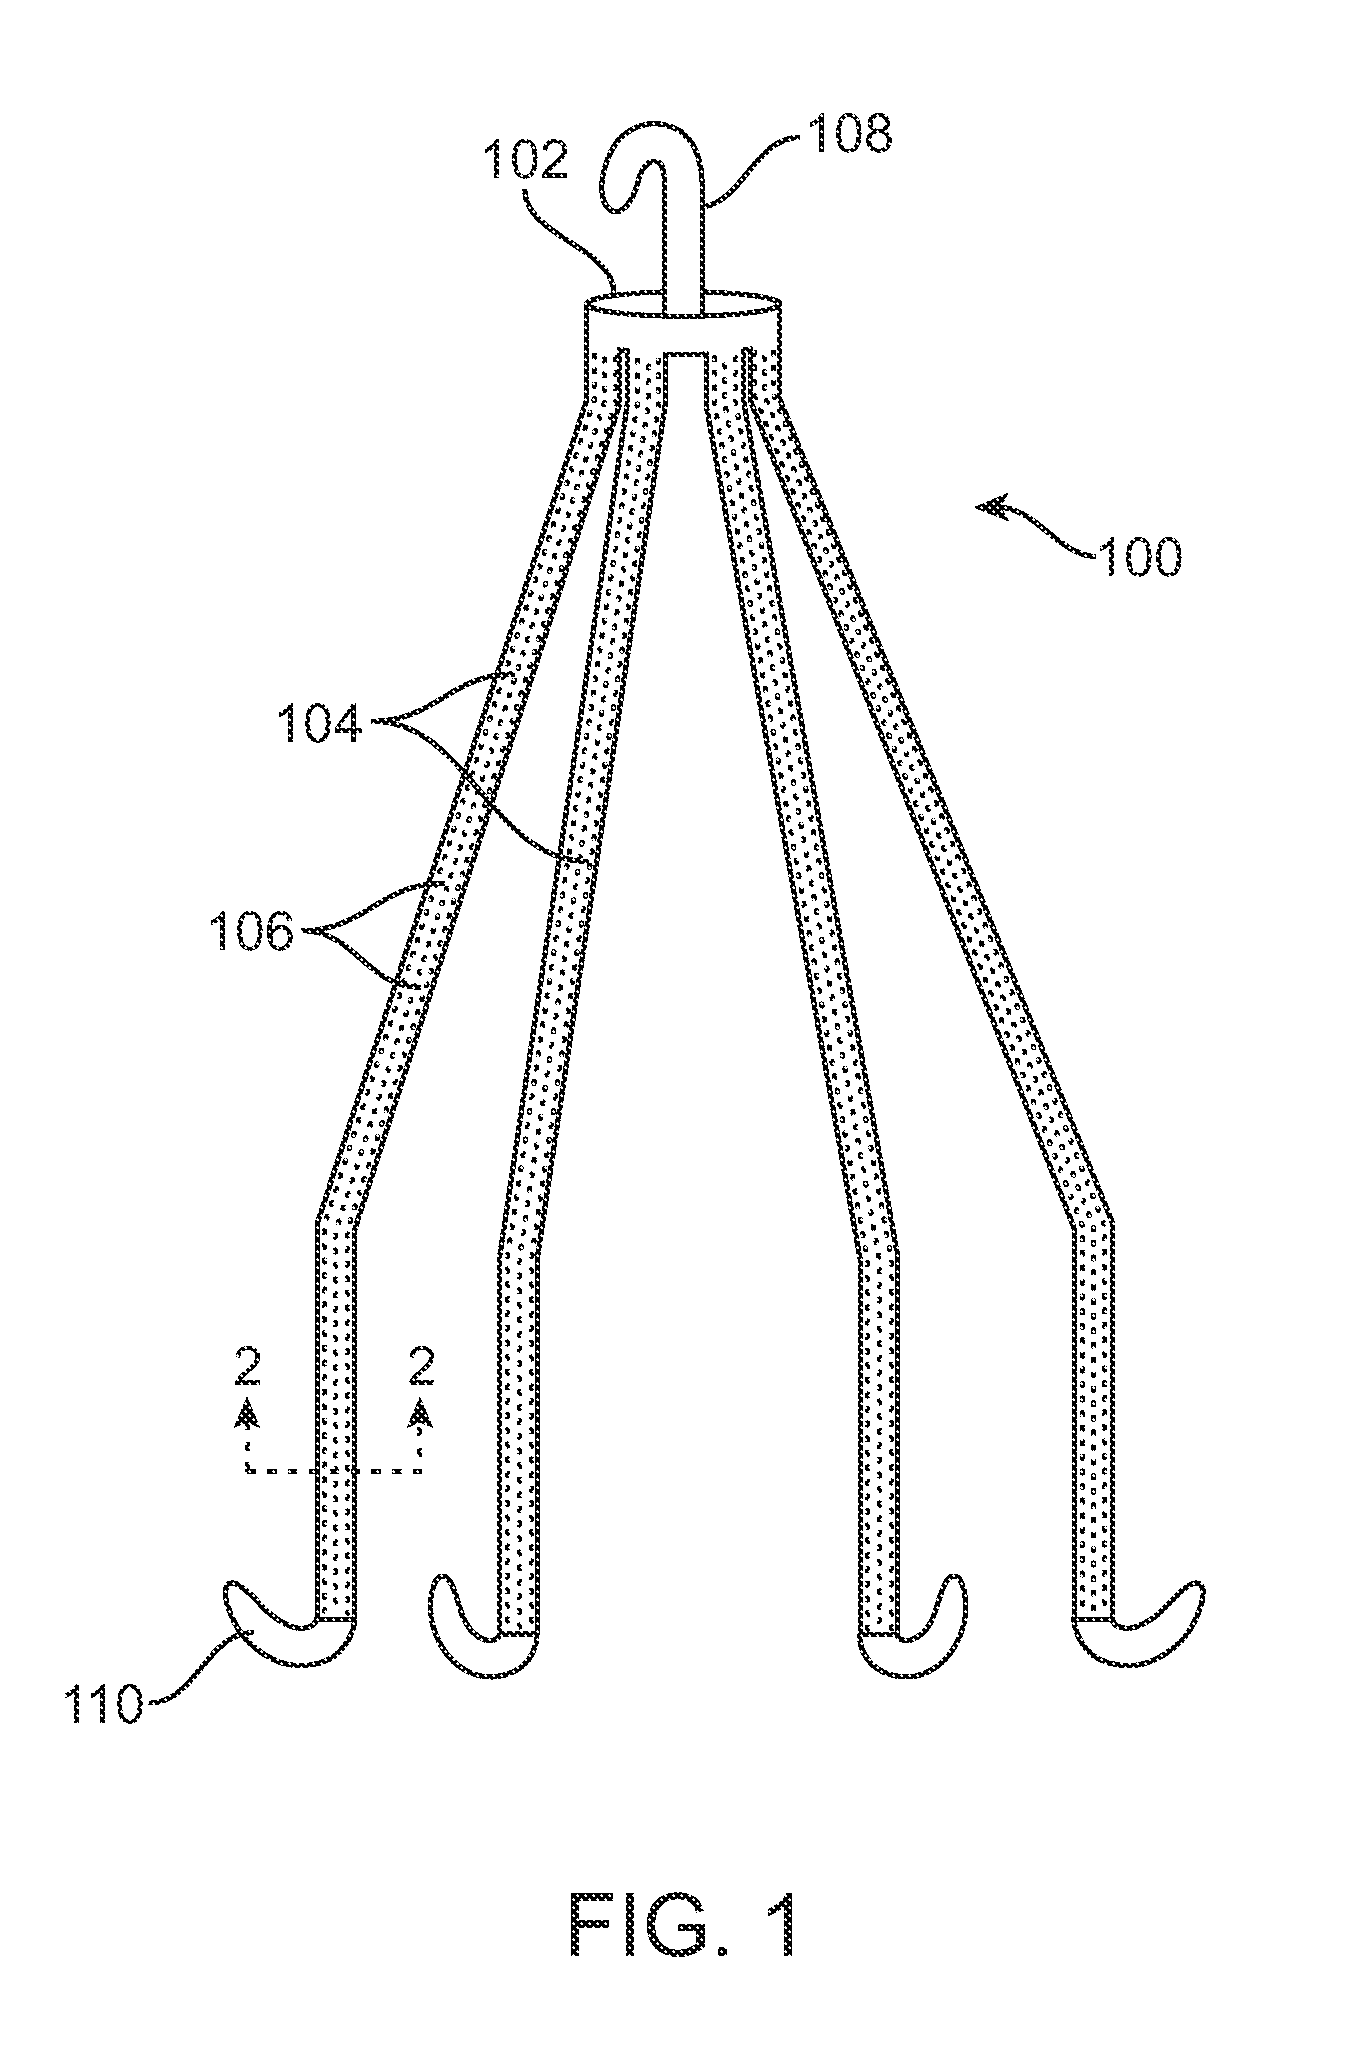 IVC Filter With Drug Delivery